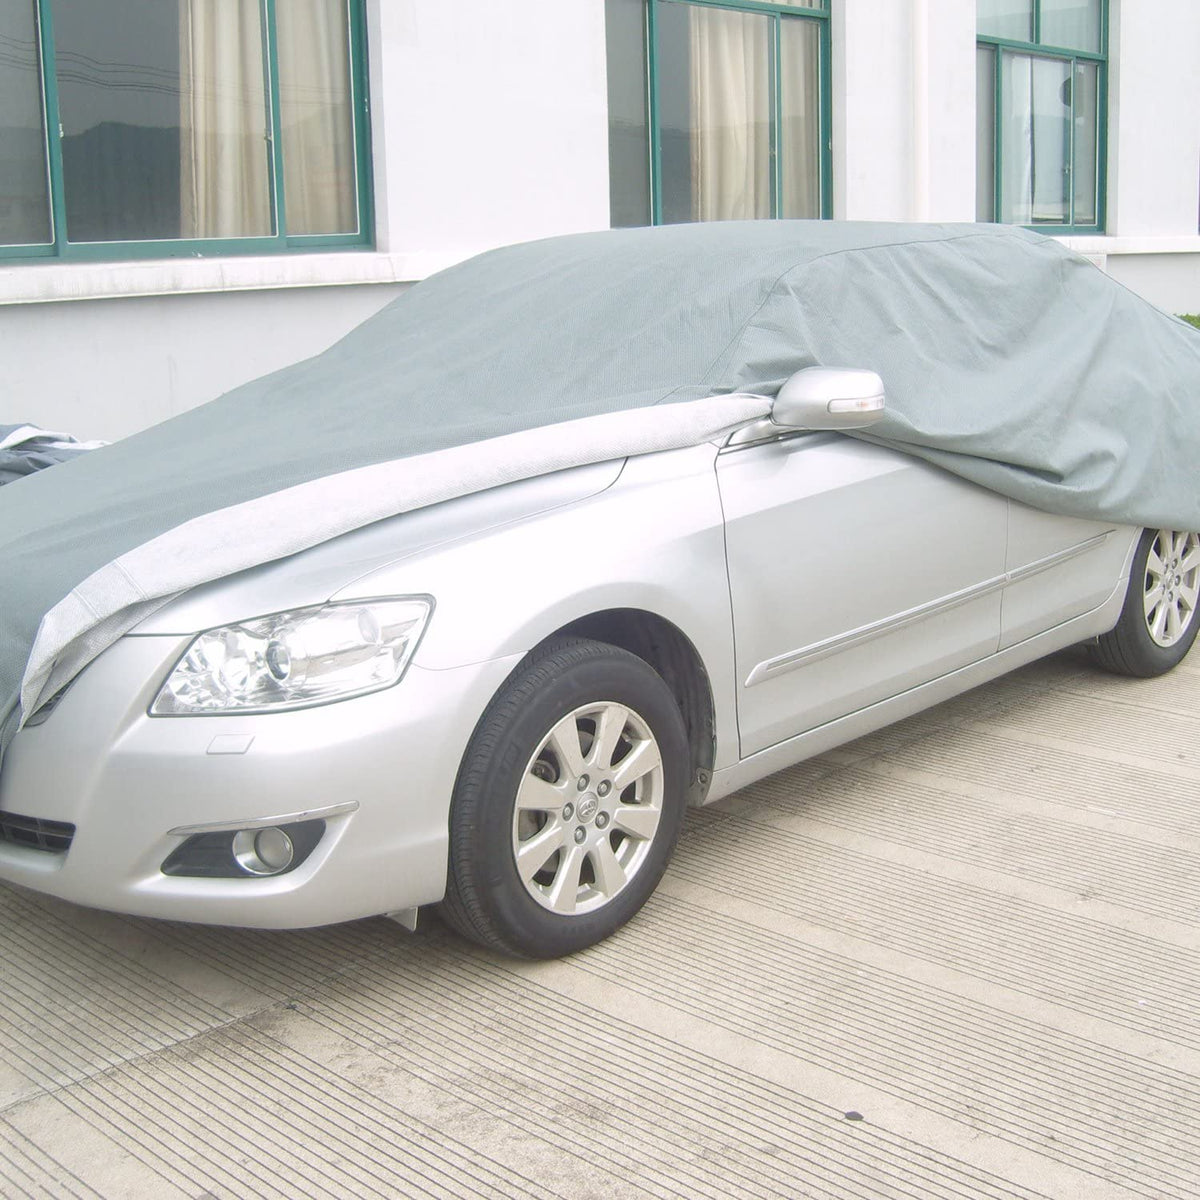 Universal Car Cover Protects Against Weather Damage, Fits Sedan Type Cars